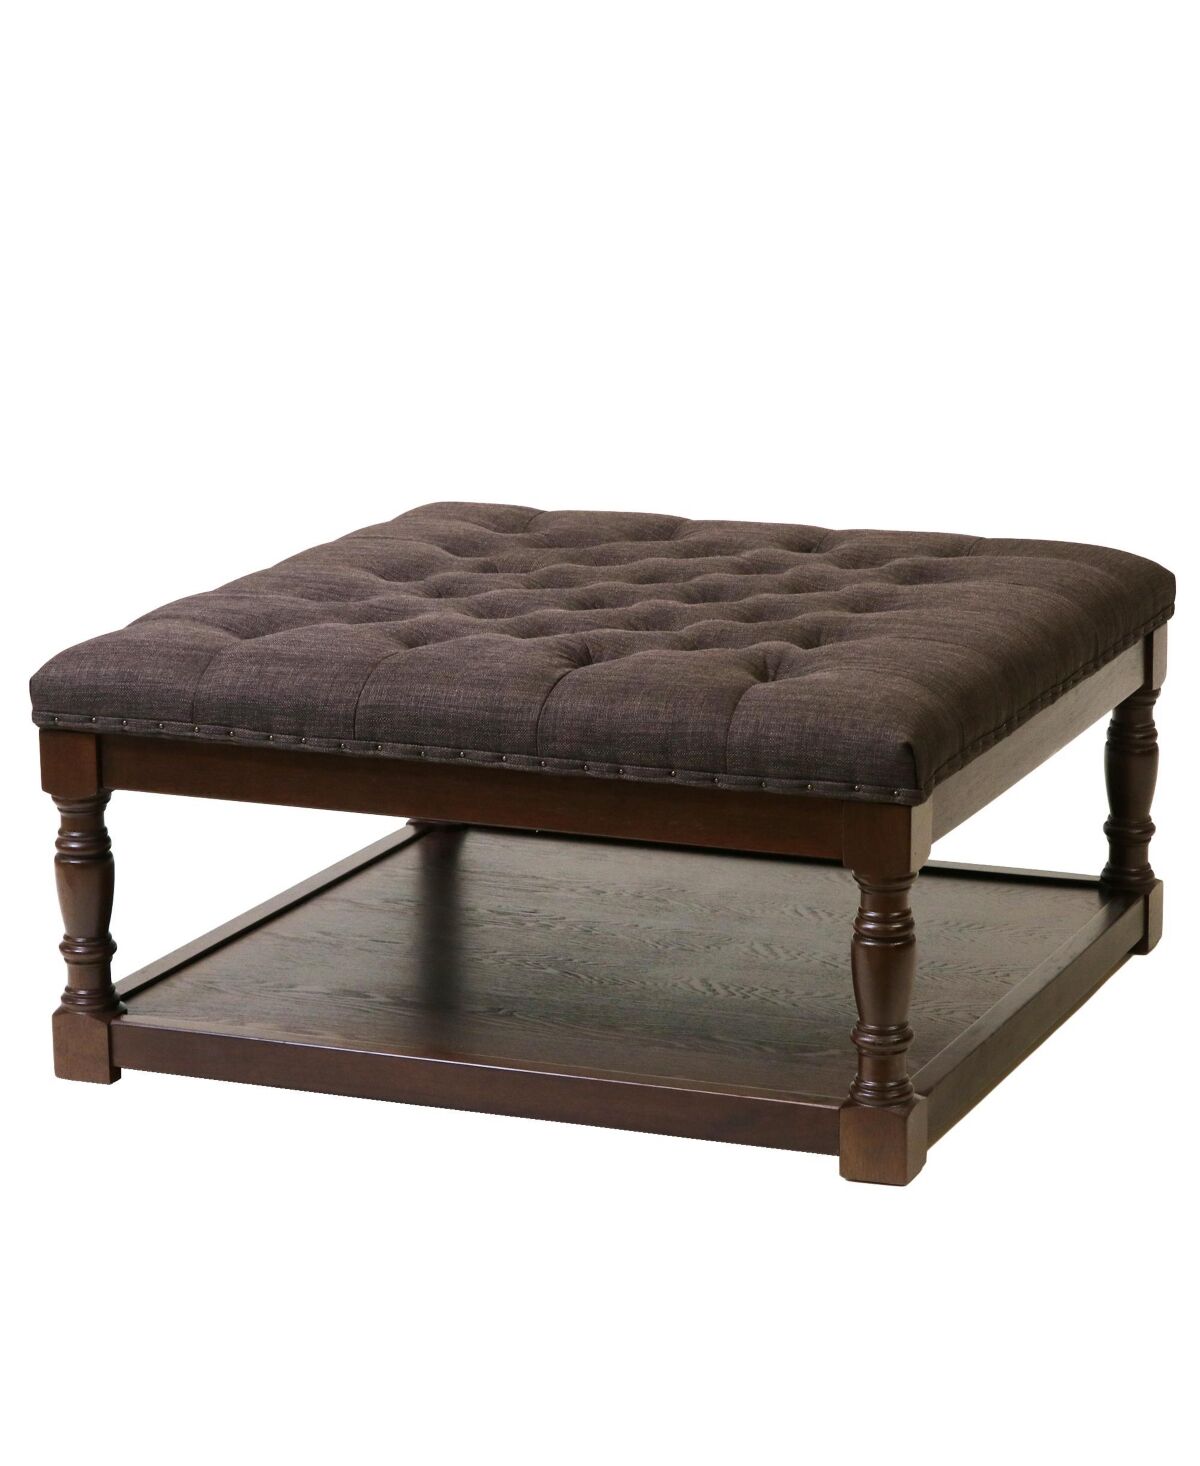 Home Accessories Cairona Indoor Ottomans - Coffee Bean